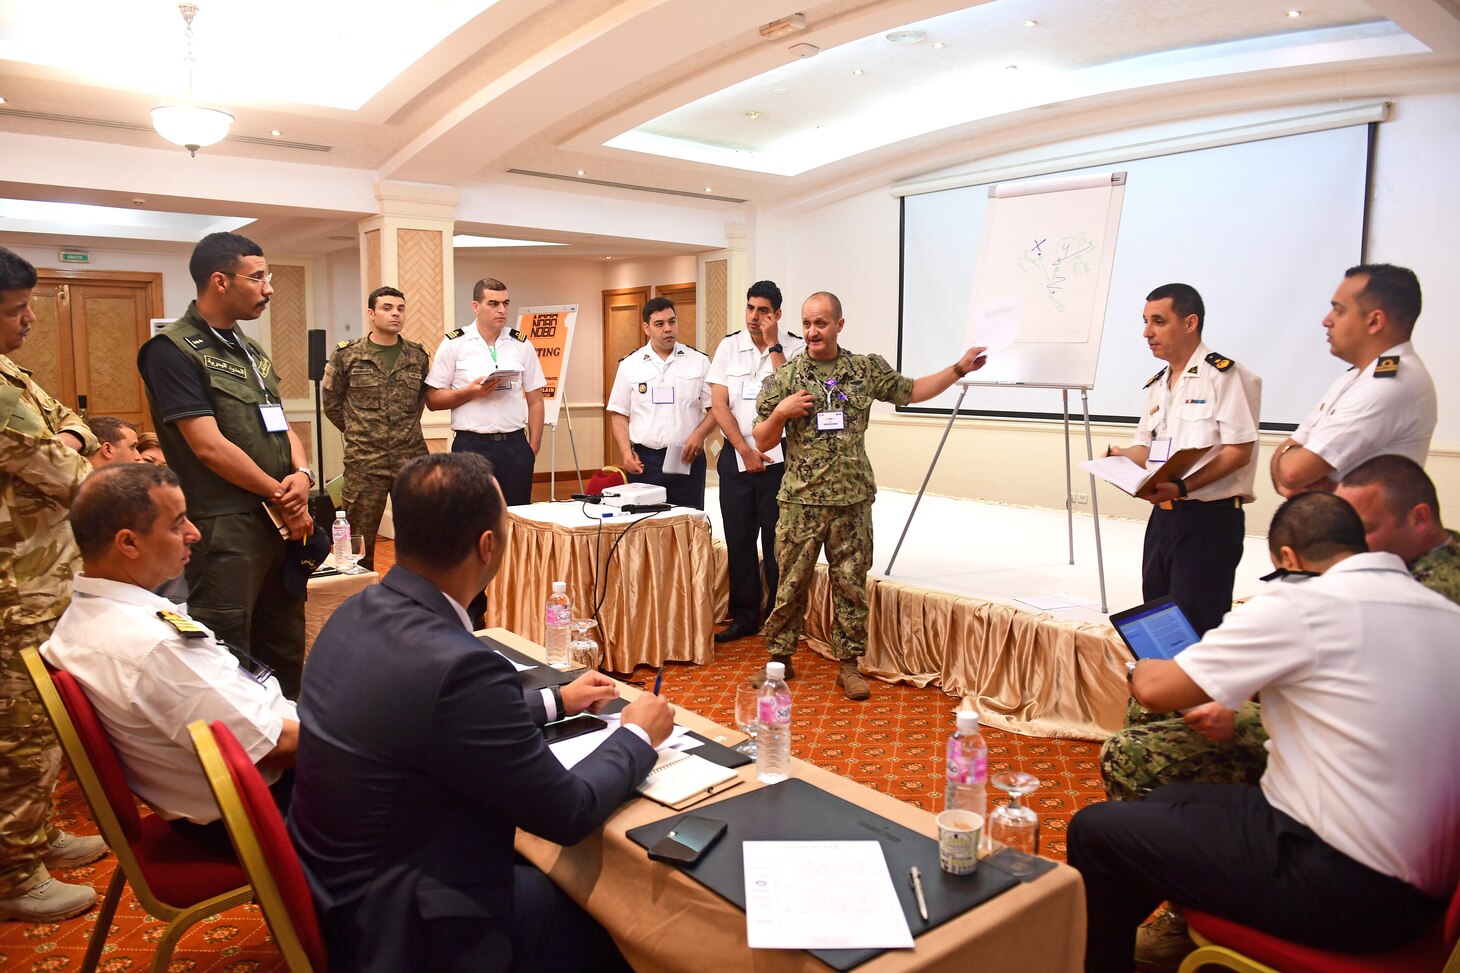 U.S. Navy and military members from Algeria, Tunisia, and Mauritania, participate in a maritime legal information exchange where best practices for maritime interdiction operations were shared during exercise Phoenix Express 2022 in Tunis, Tunisia, May 26, 2022. Phoenix Express 22, conducted by U.S. Naval Forces Africa, is a maritime exercise designed to improve cooperation among participating nations in order to increase maritime safety and security in the Mediterranean.